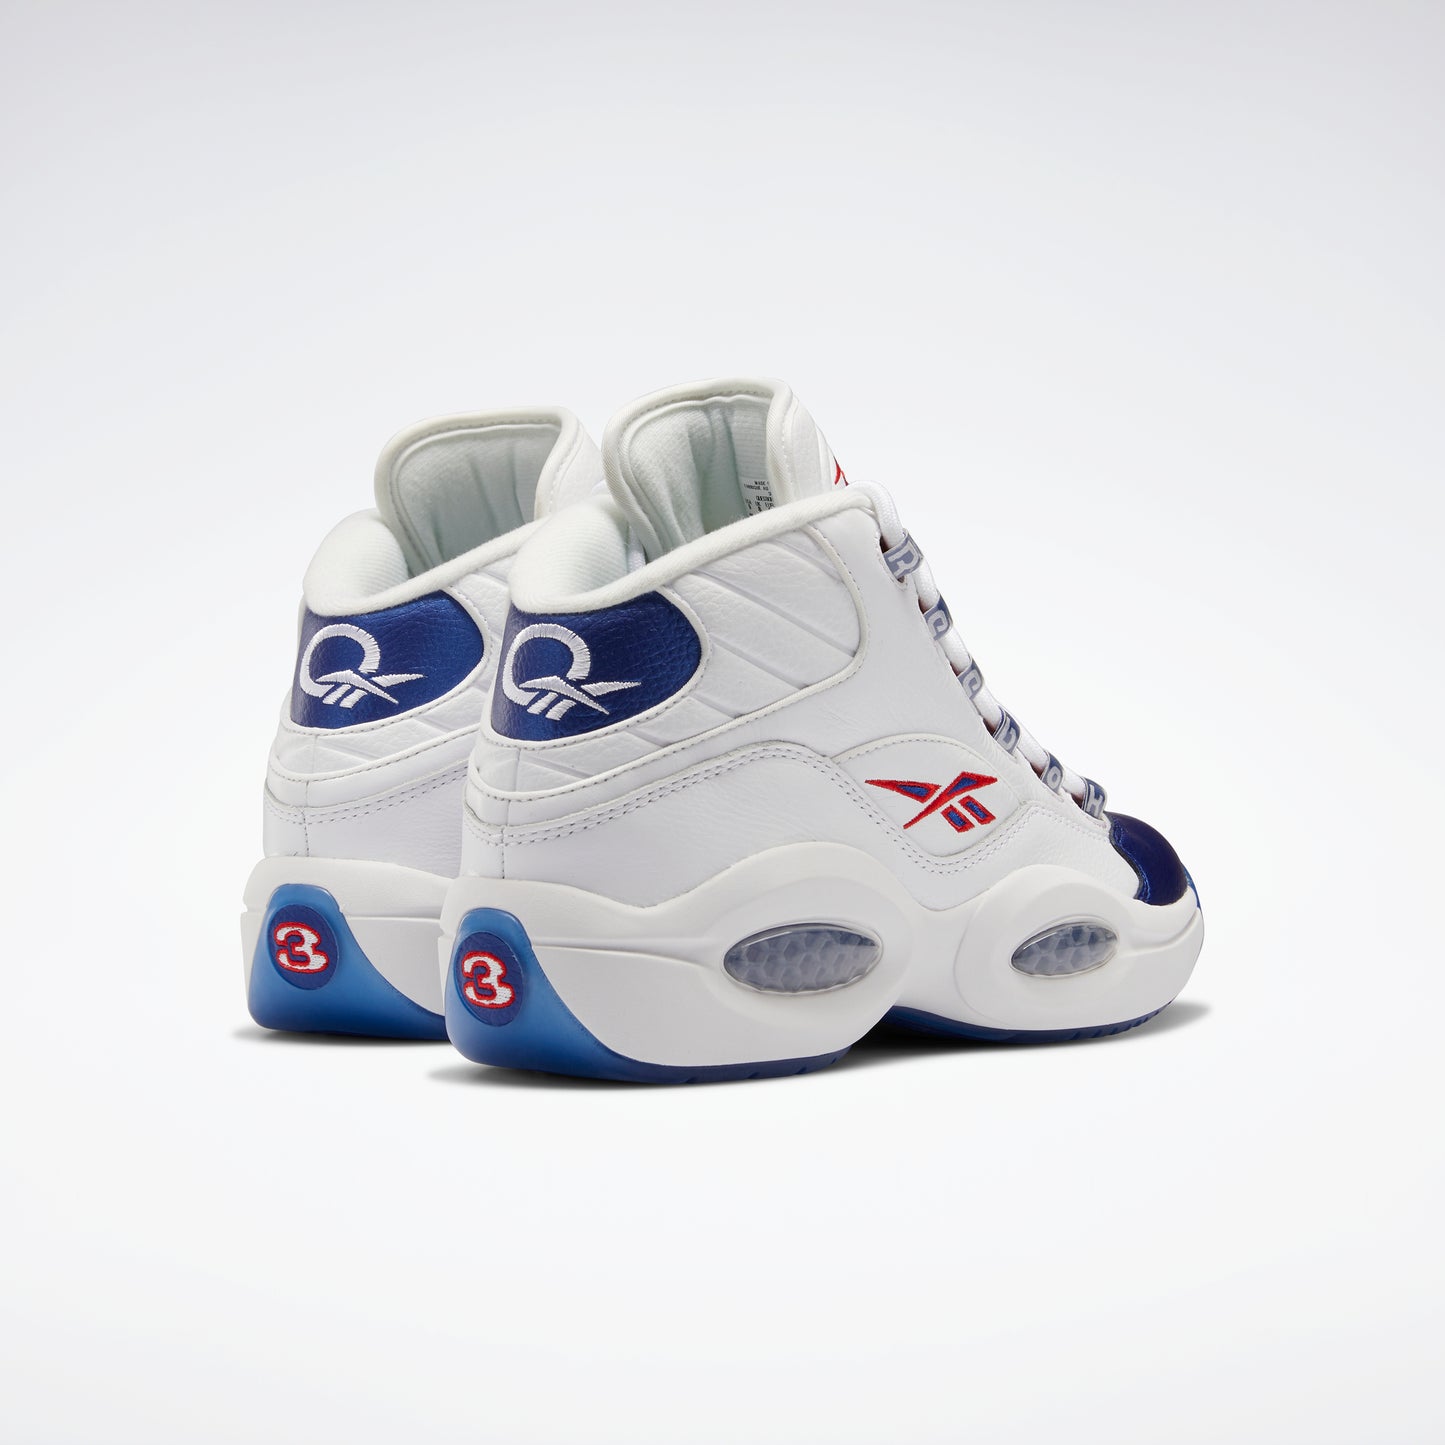 Chaussures Reebok Footwear Hommes Question Mid Chaussures Ftwwht/Clacob/Clear